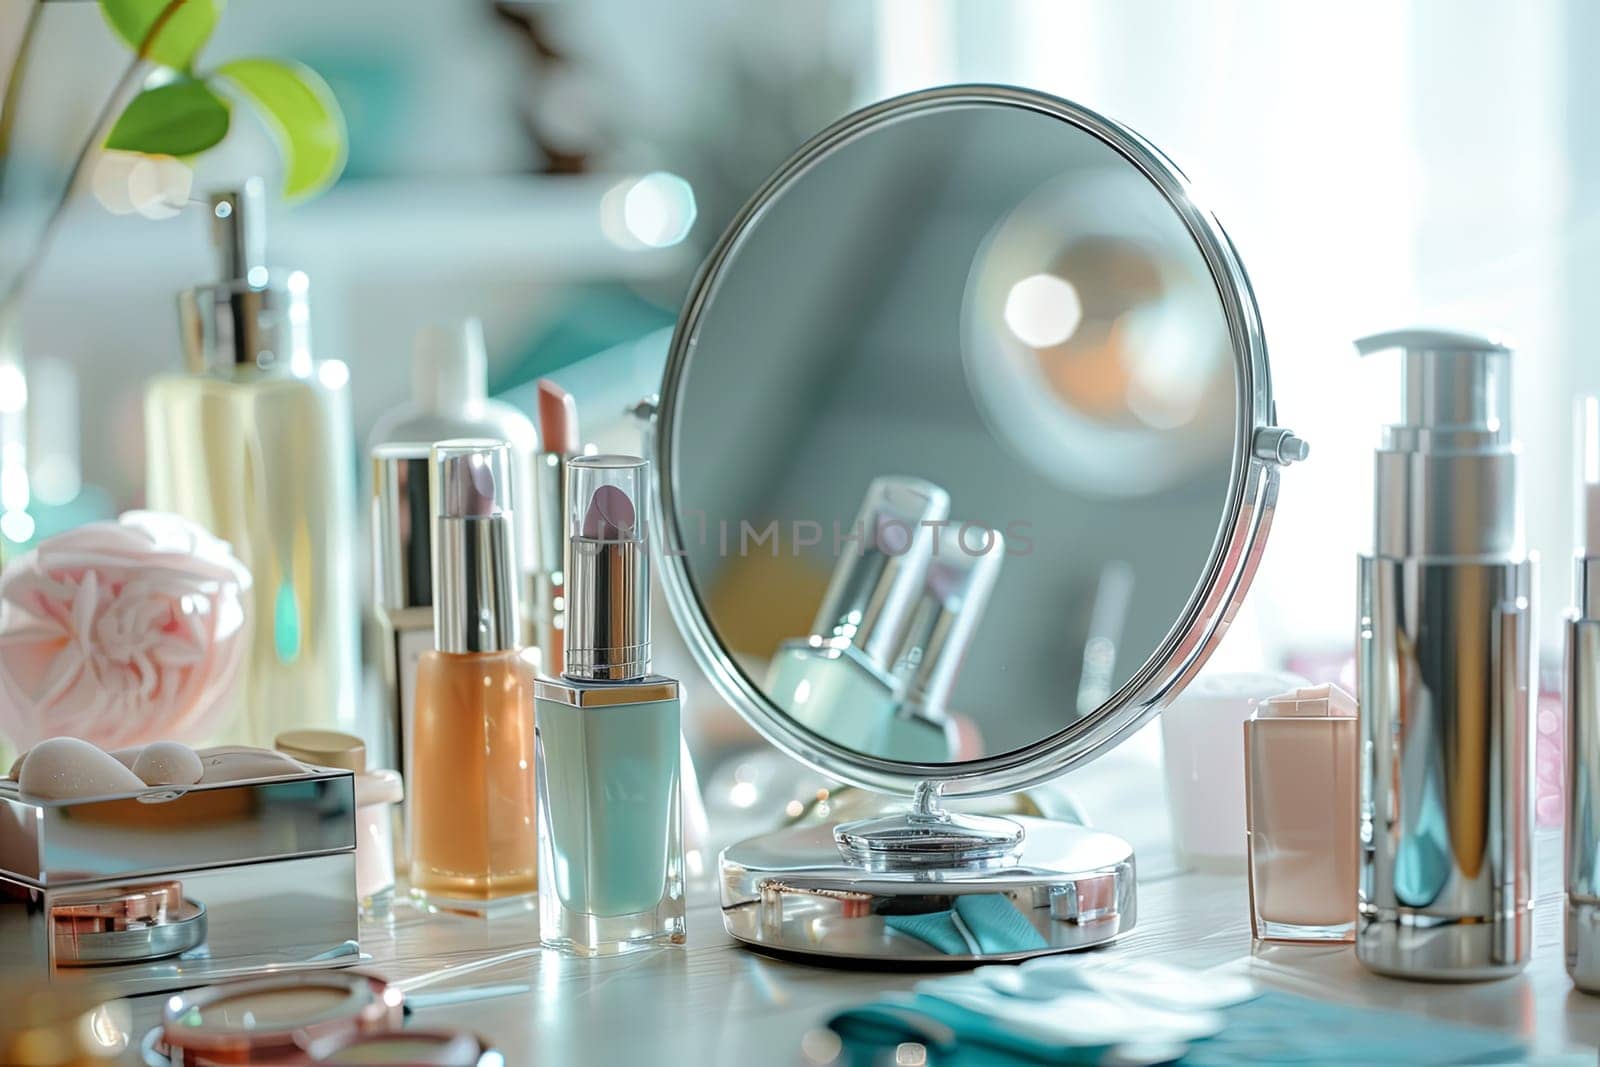 A close-up of a tabletop mirror surrounded by various cosmetic products, suggesting a well-organized and elegant vanity.